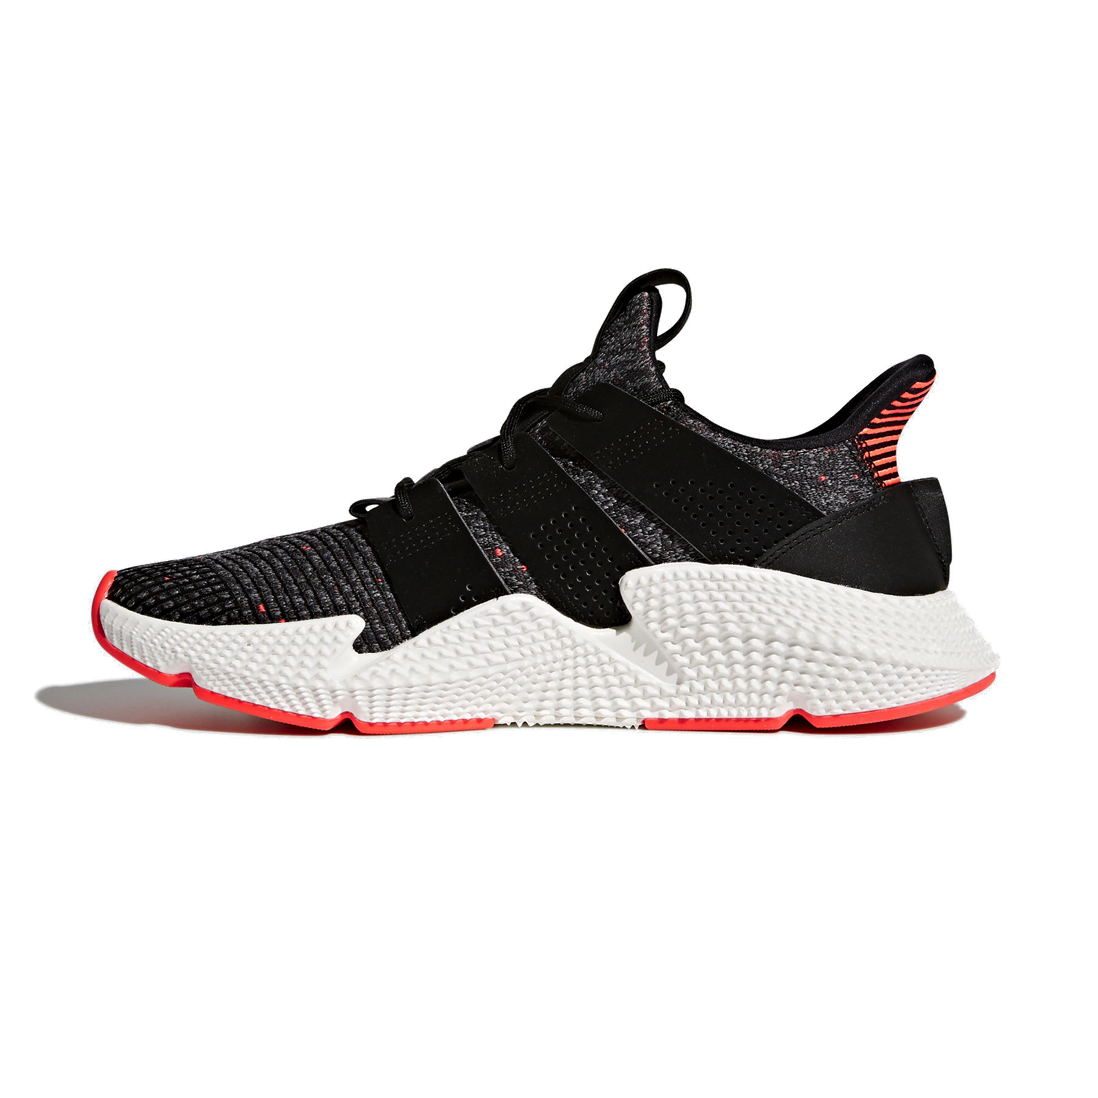 adidas prophere red